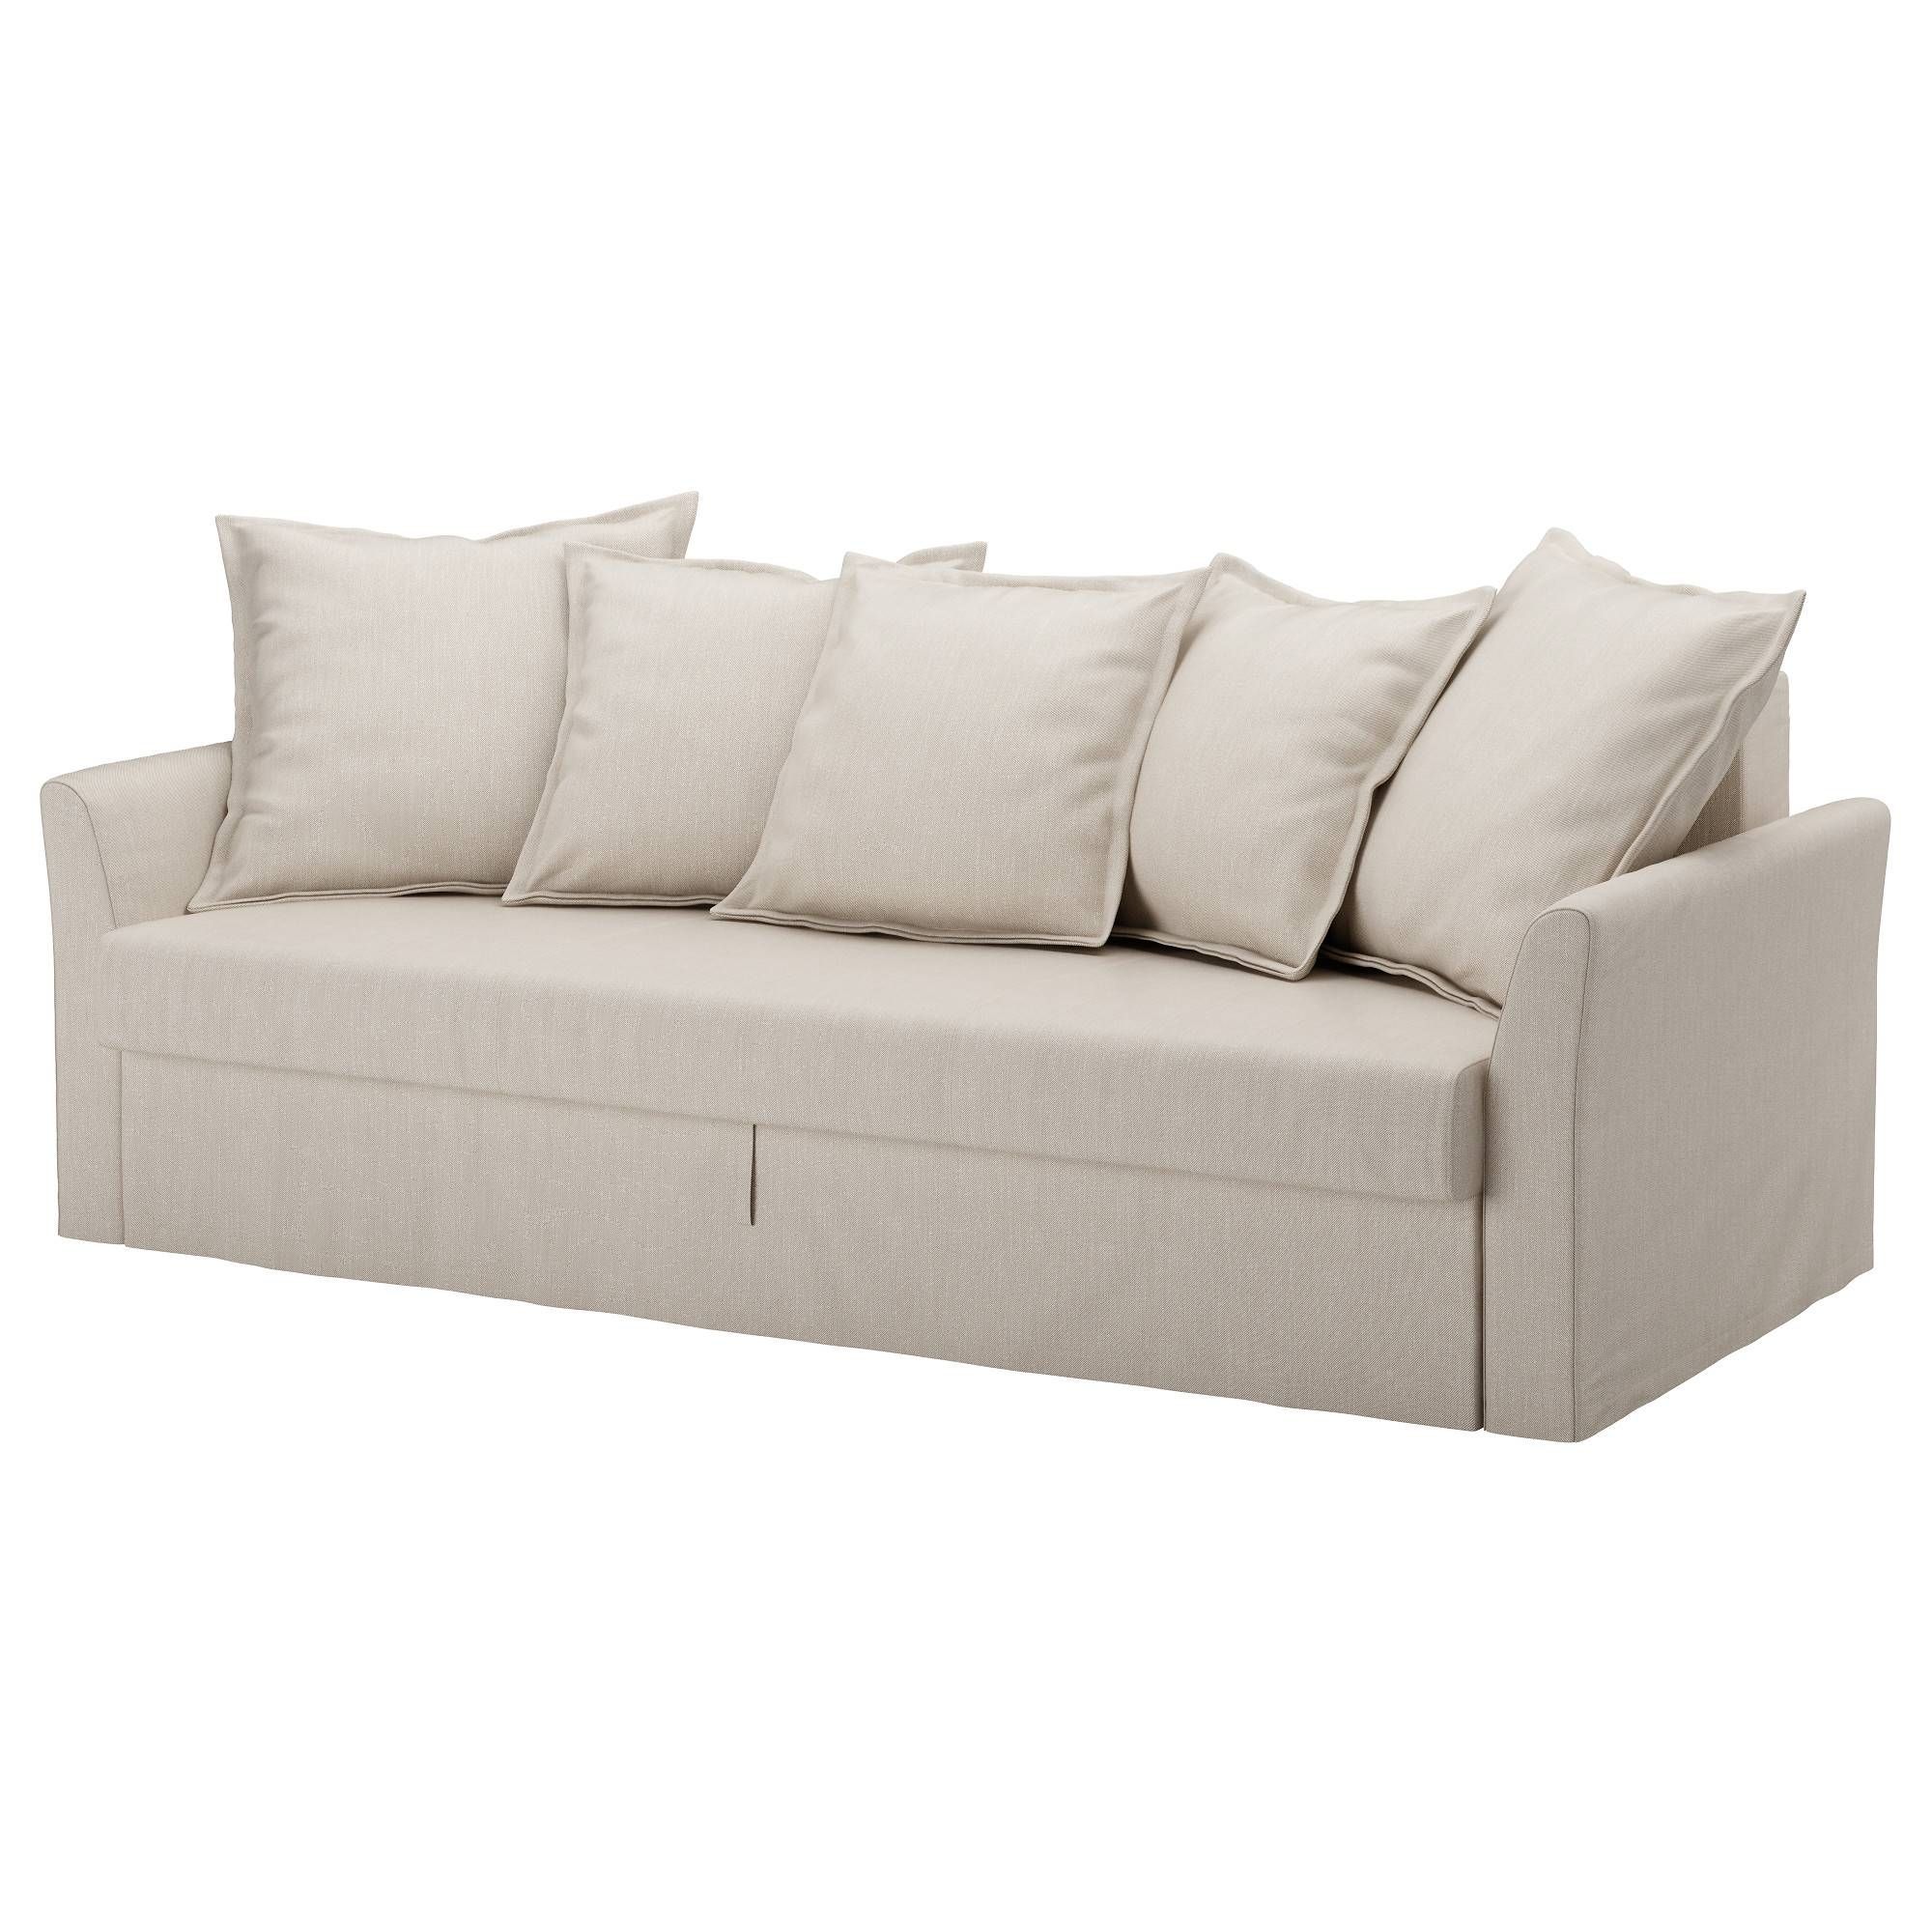 Sofa Beds & Futons – Ikea In Faux Suede Sofa Bed (View 15 of 25)